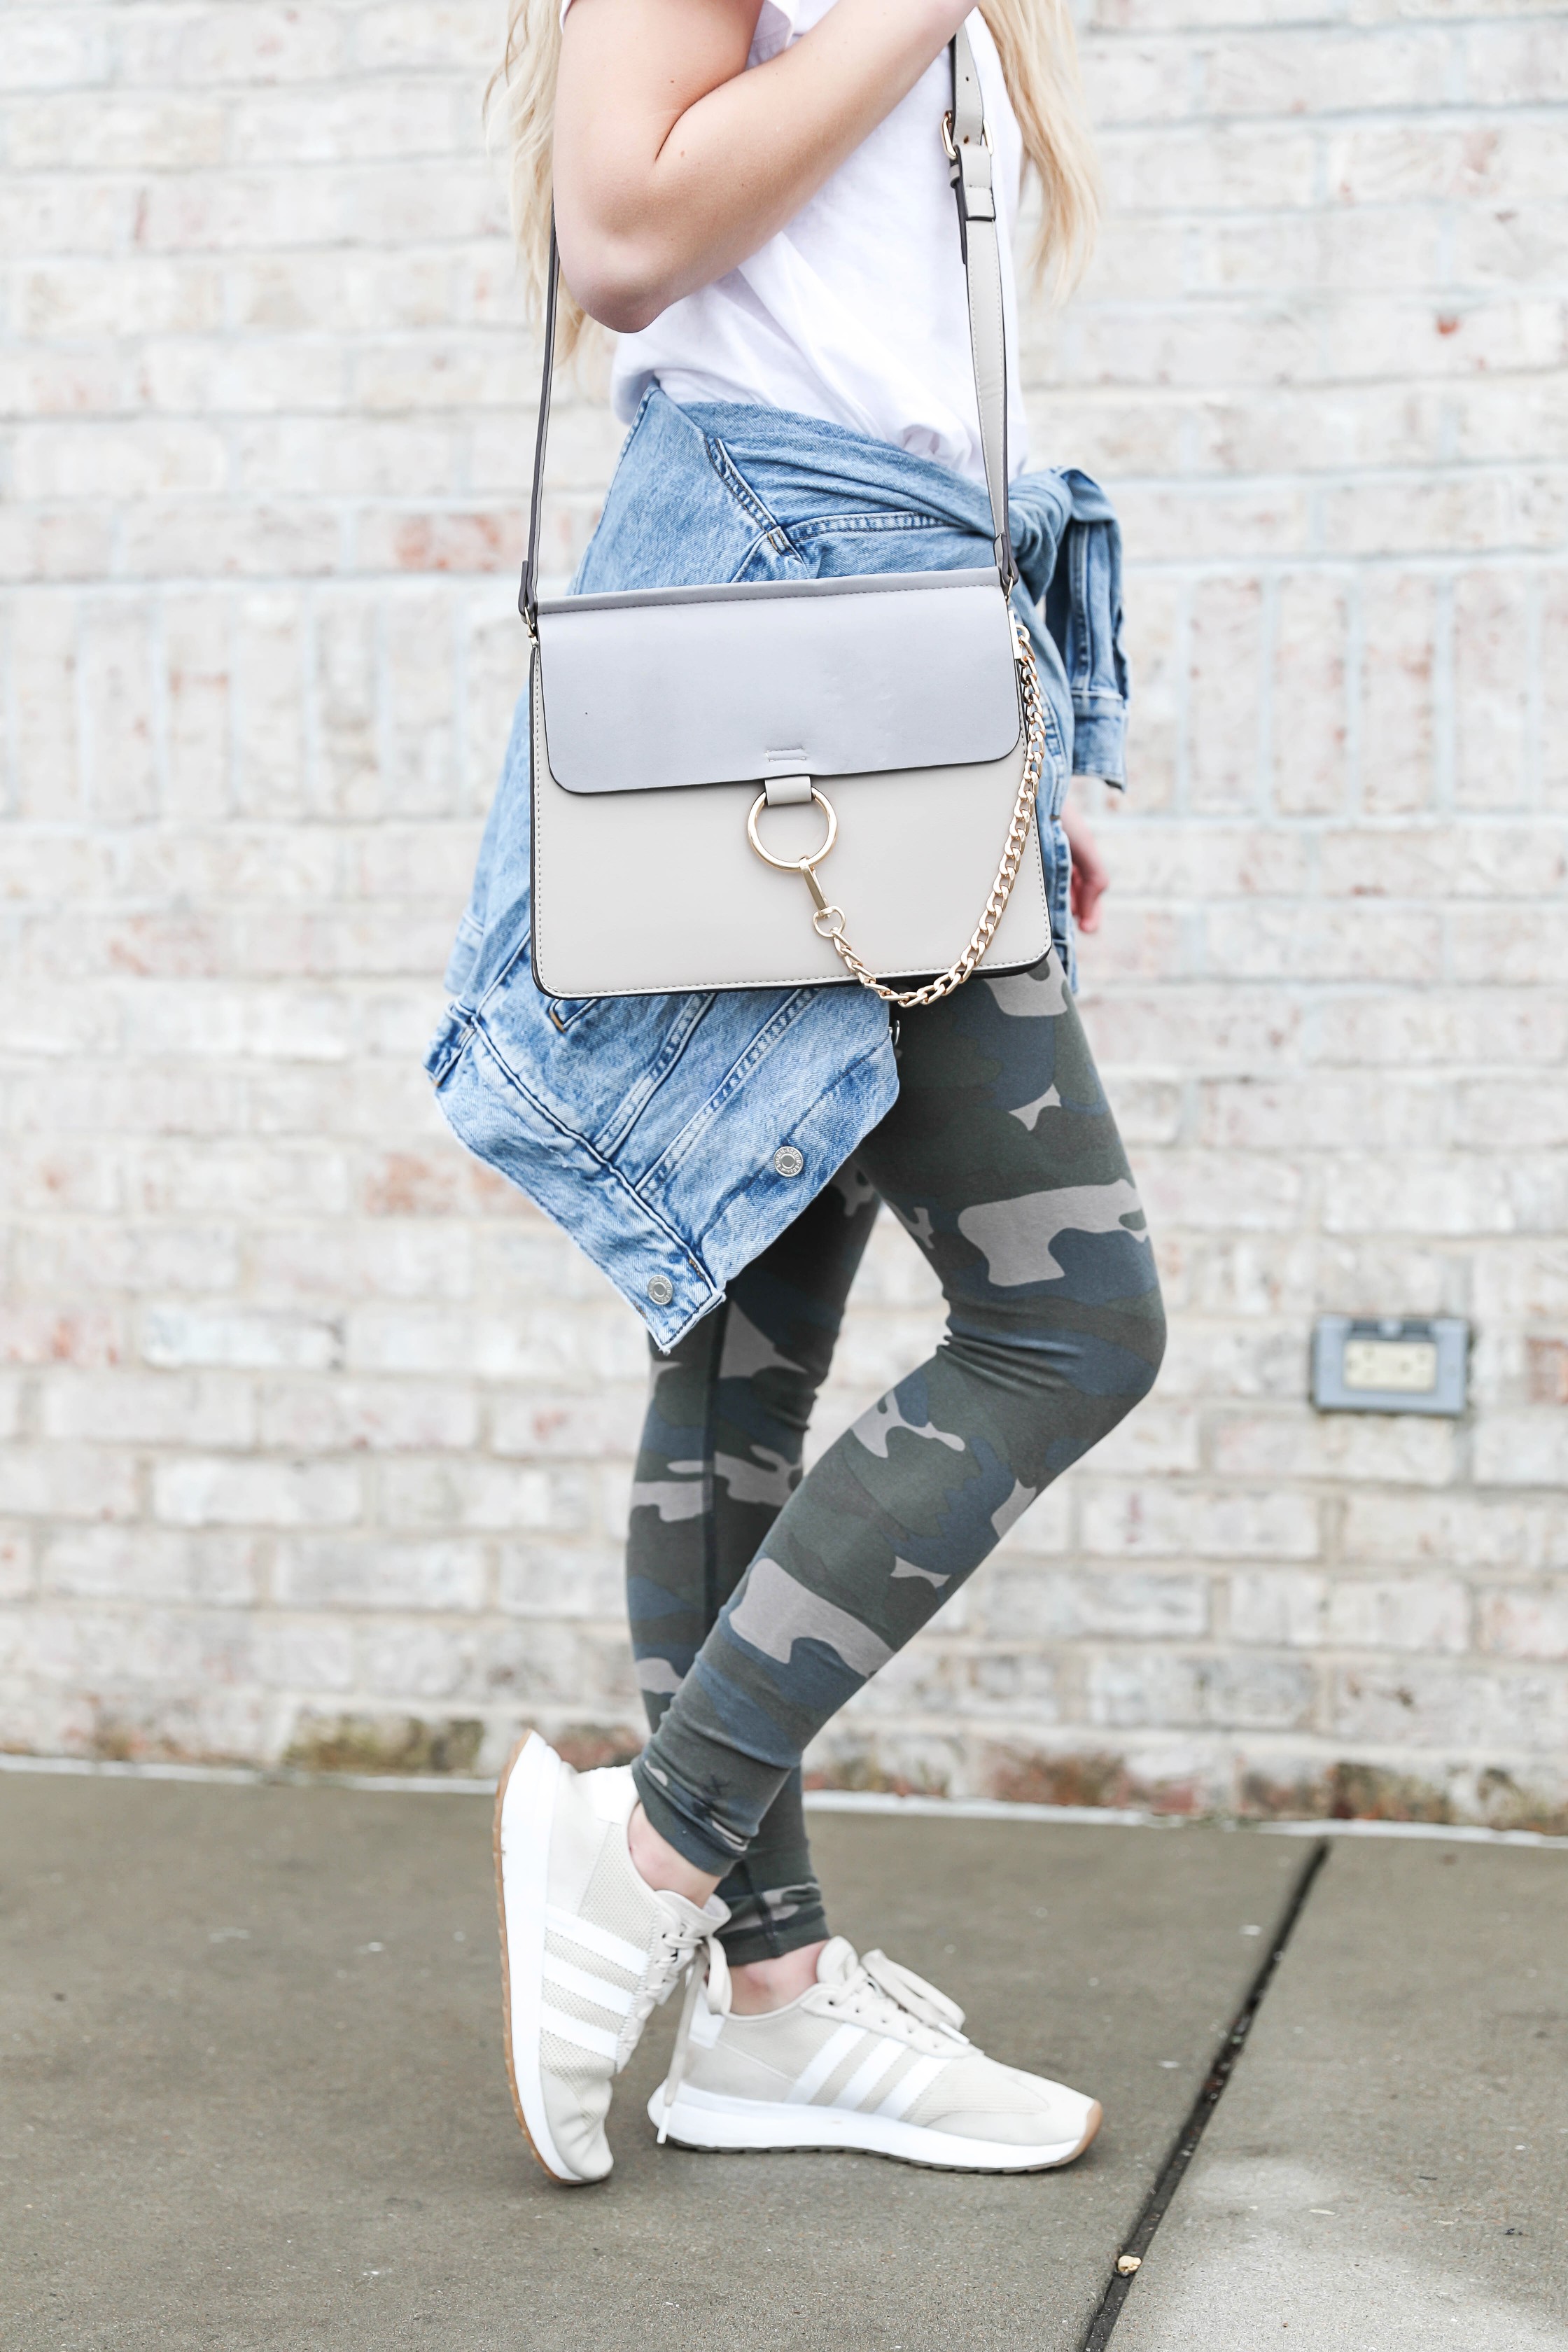 Camo leggings white tee jean jacket camo trend camouflage outfit winter outfit spring style causl outfit fashion blog daily dose of charm lauren lindmark 675A3881